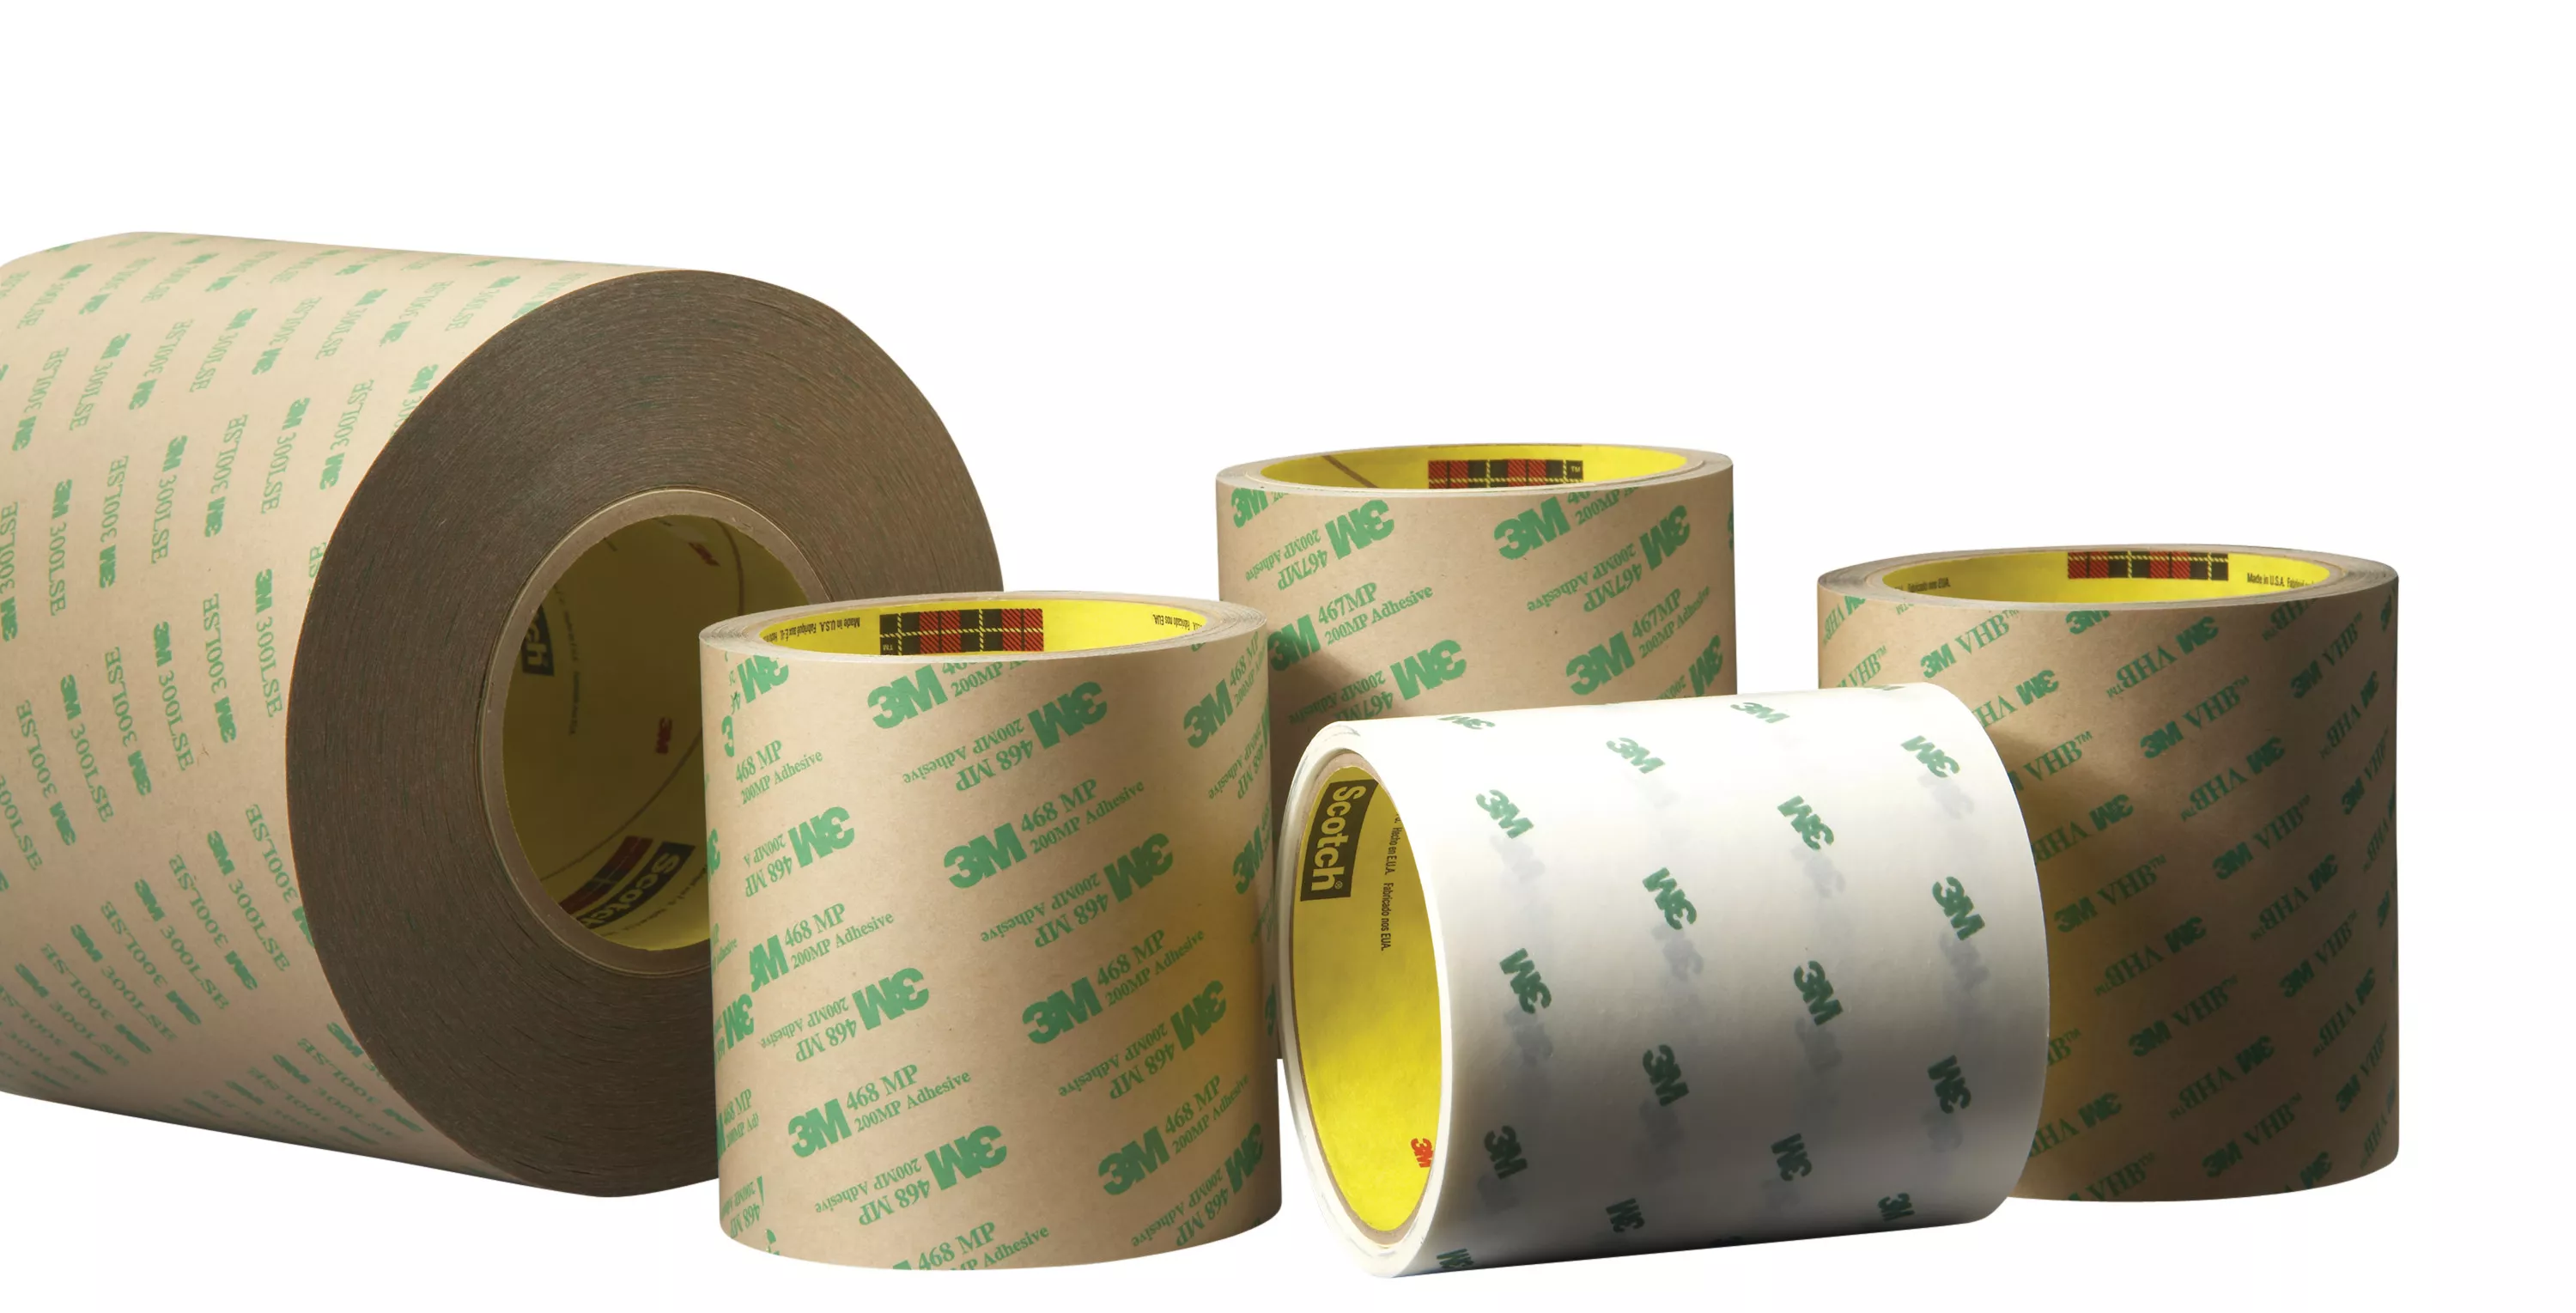 3M™ Adhesive Transfer Tape 966, Clear, 1 in x 60 yd, 2.3 mil, 36
Roll/Case